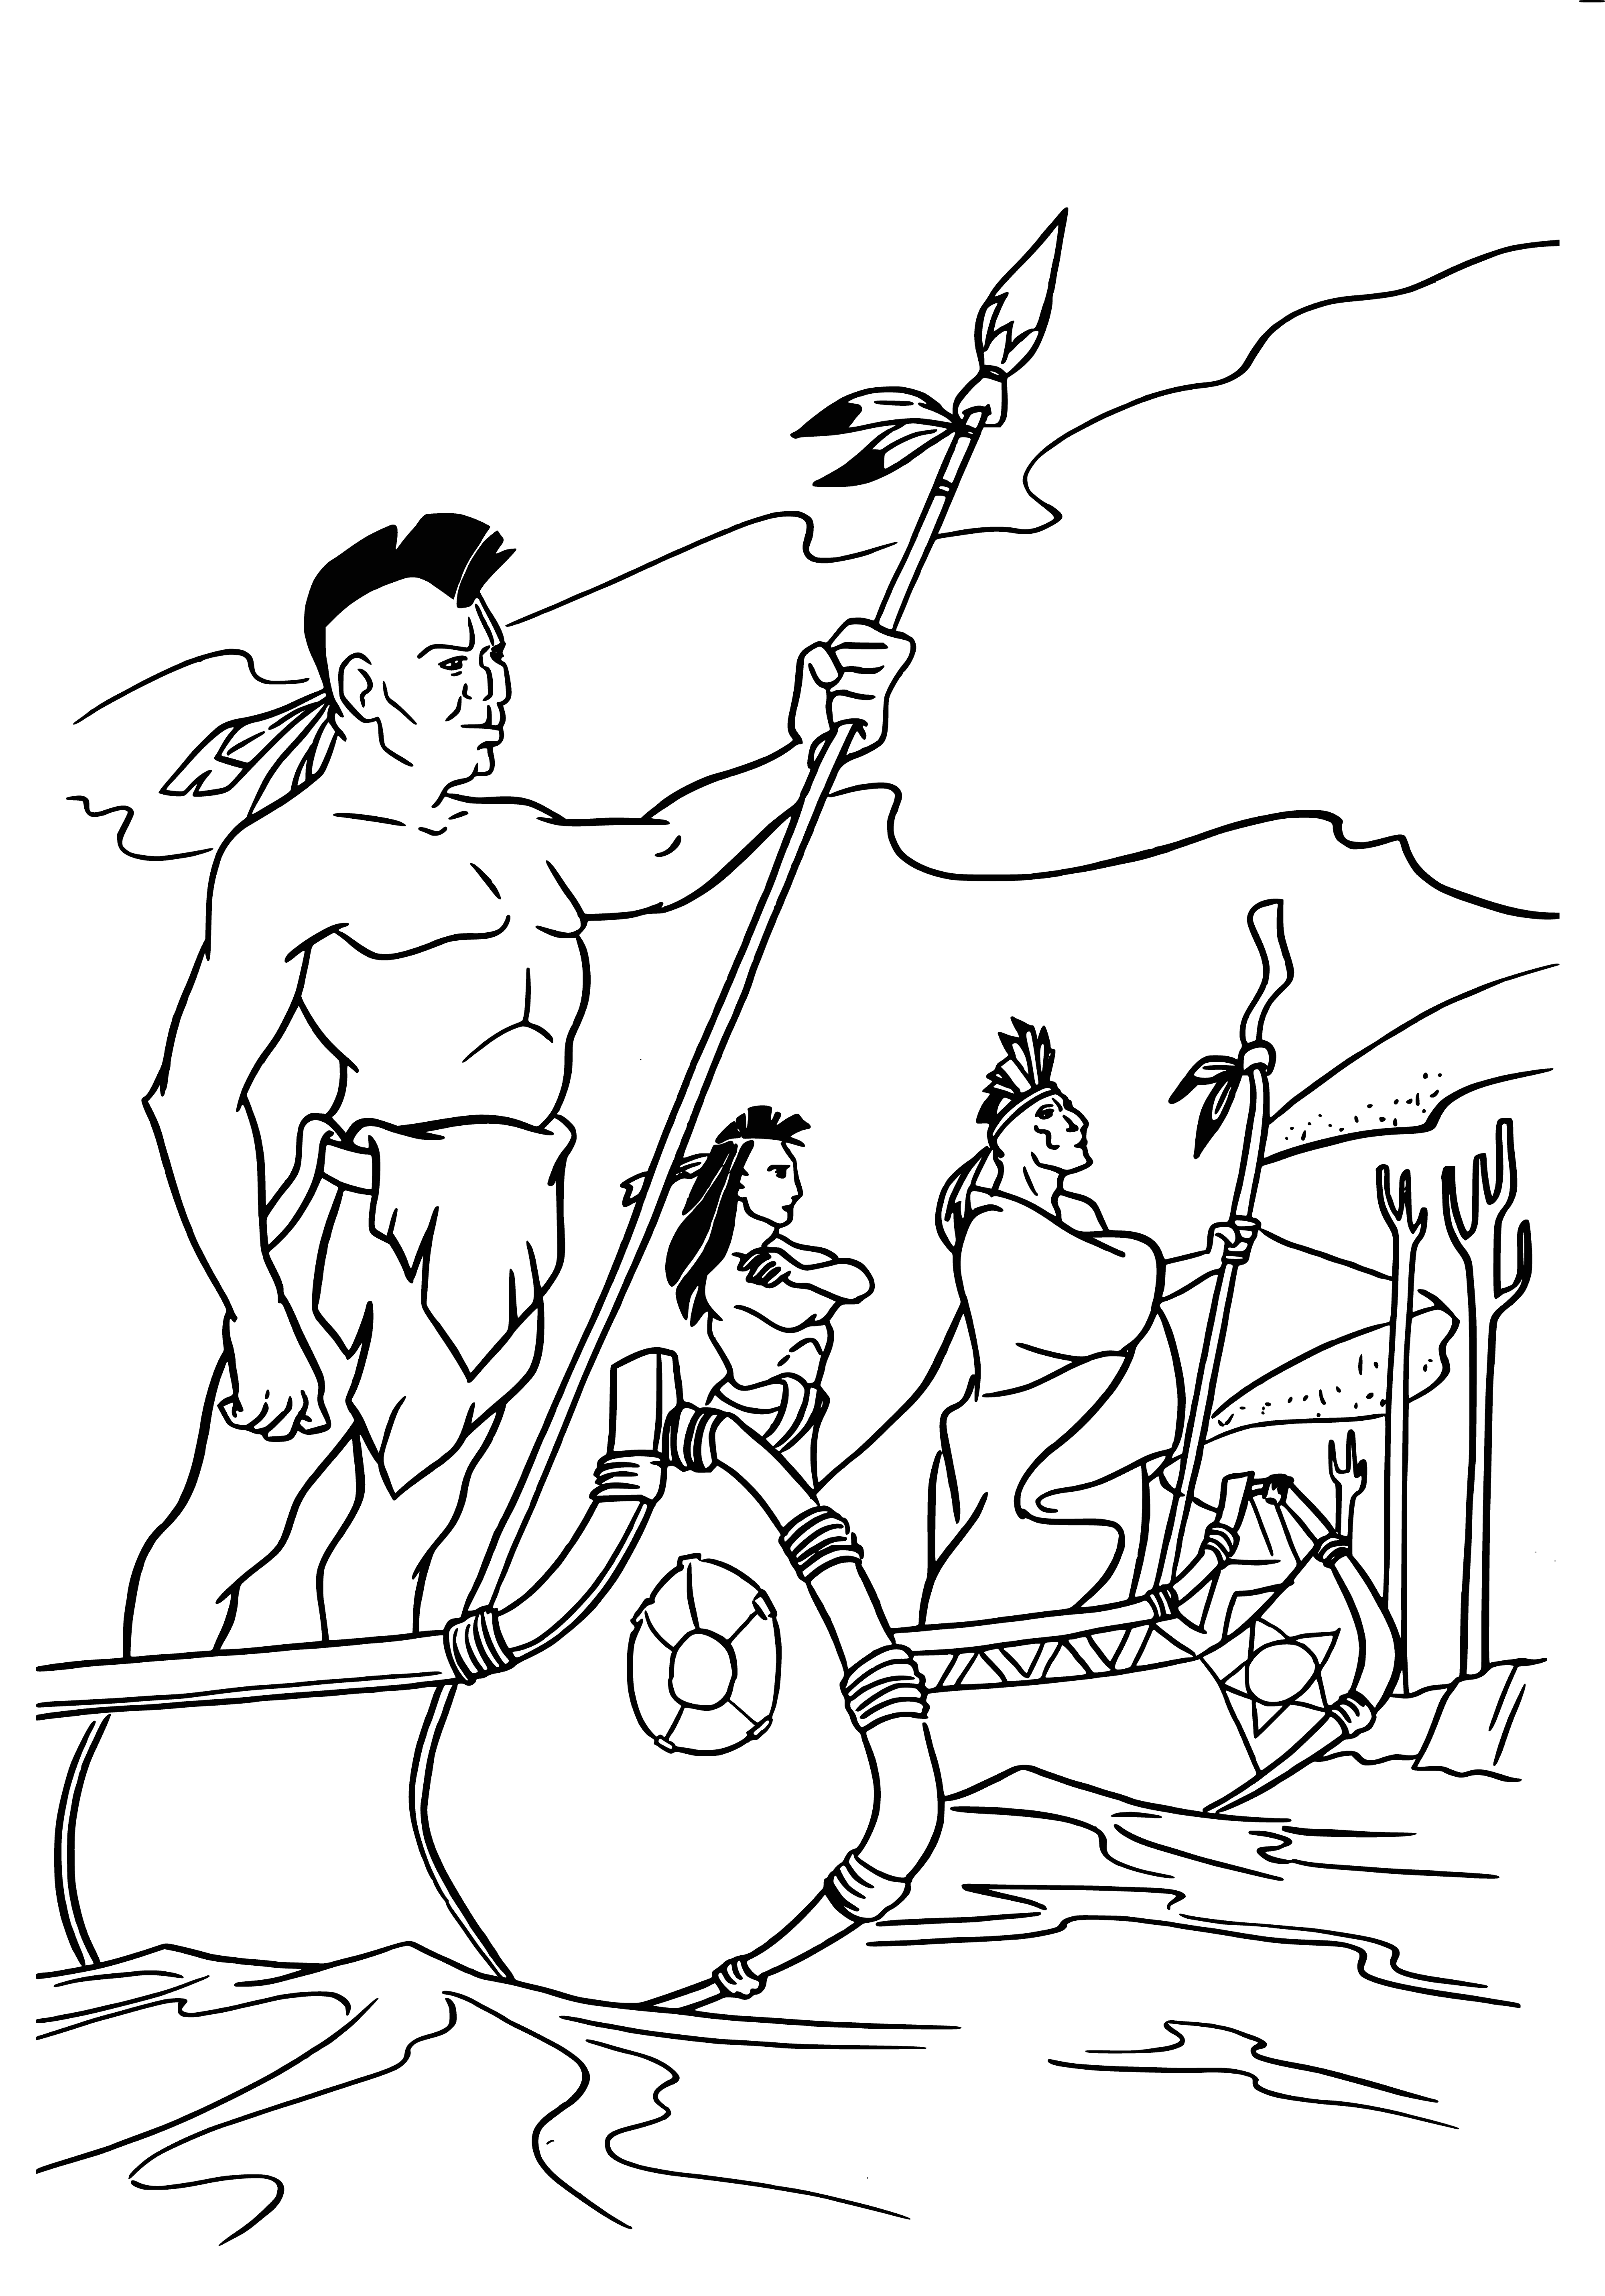 coloring page: Group of Pocahontas - Indians wearing varied clothing, some with weapons, around central fire.